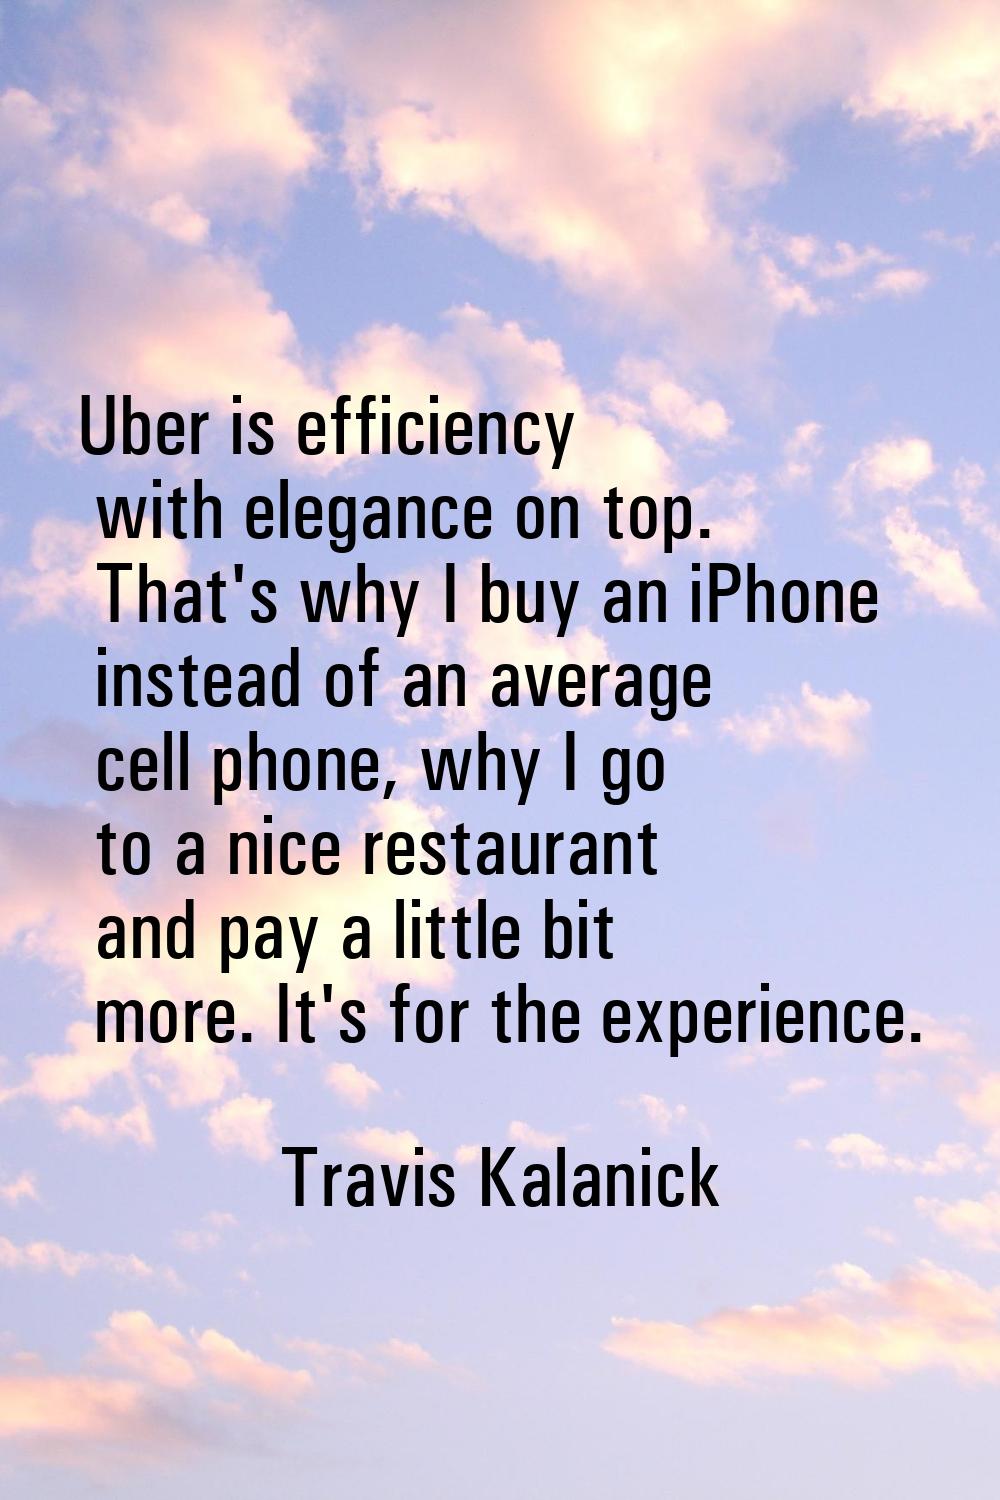 Uber is efficiency with elegance on top. That's why I buy an iPhone instead of an average cell phon